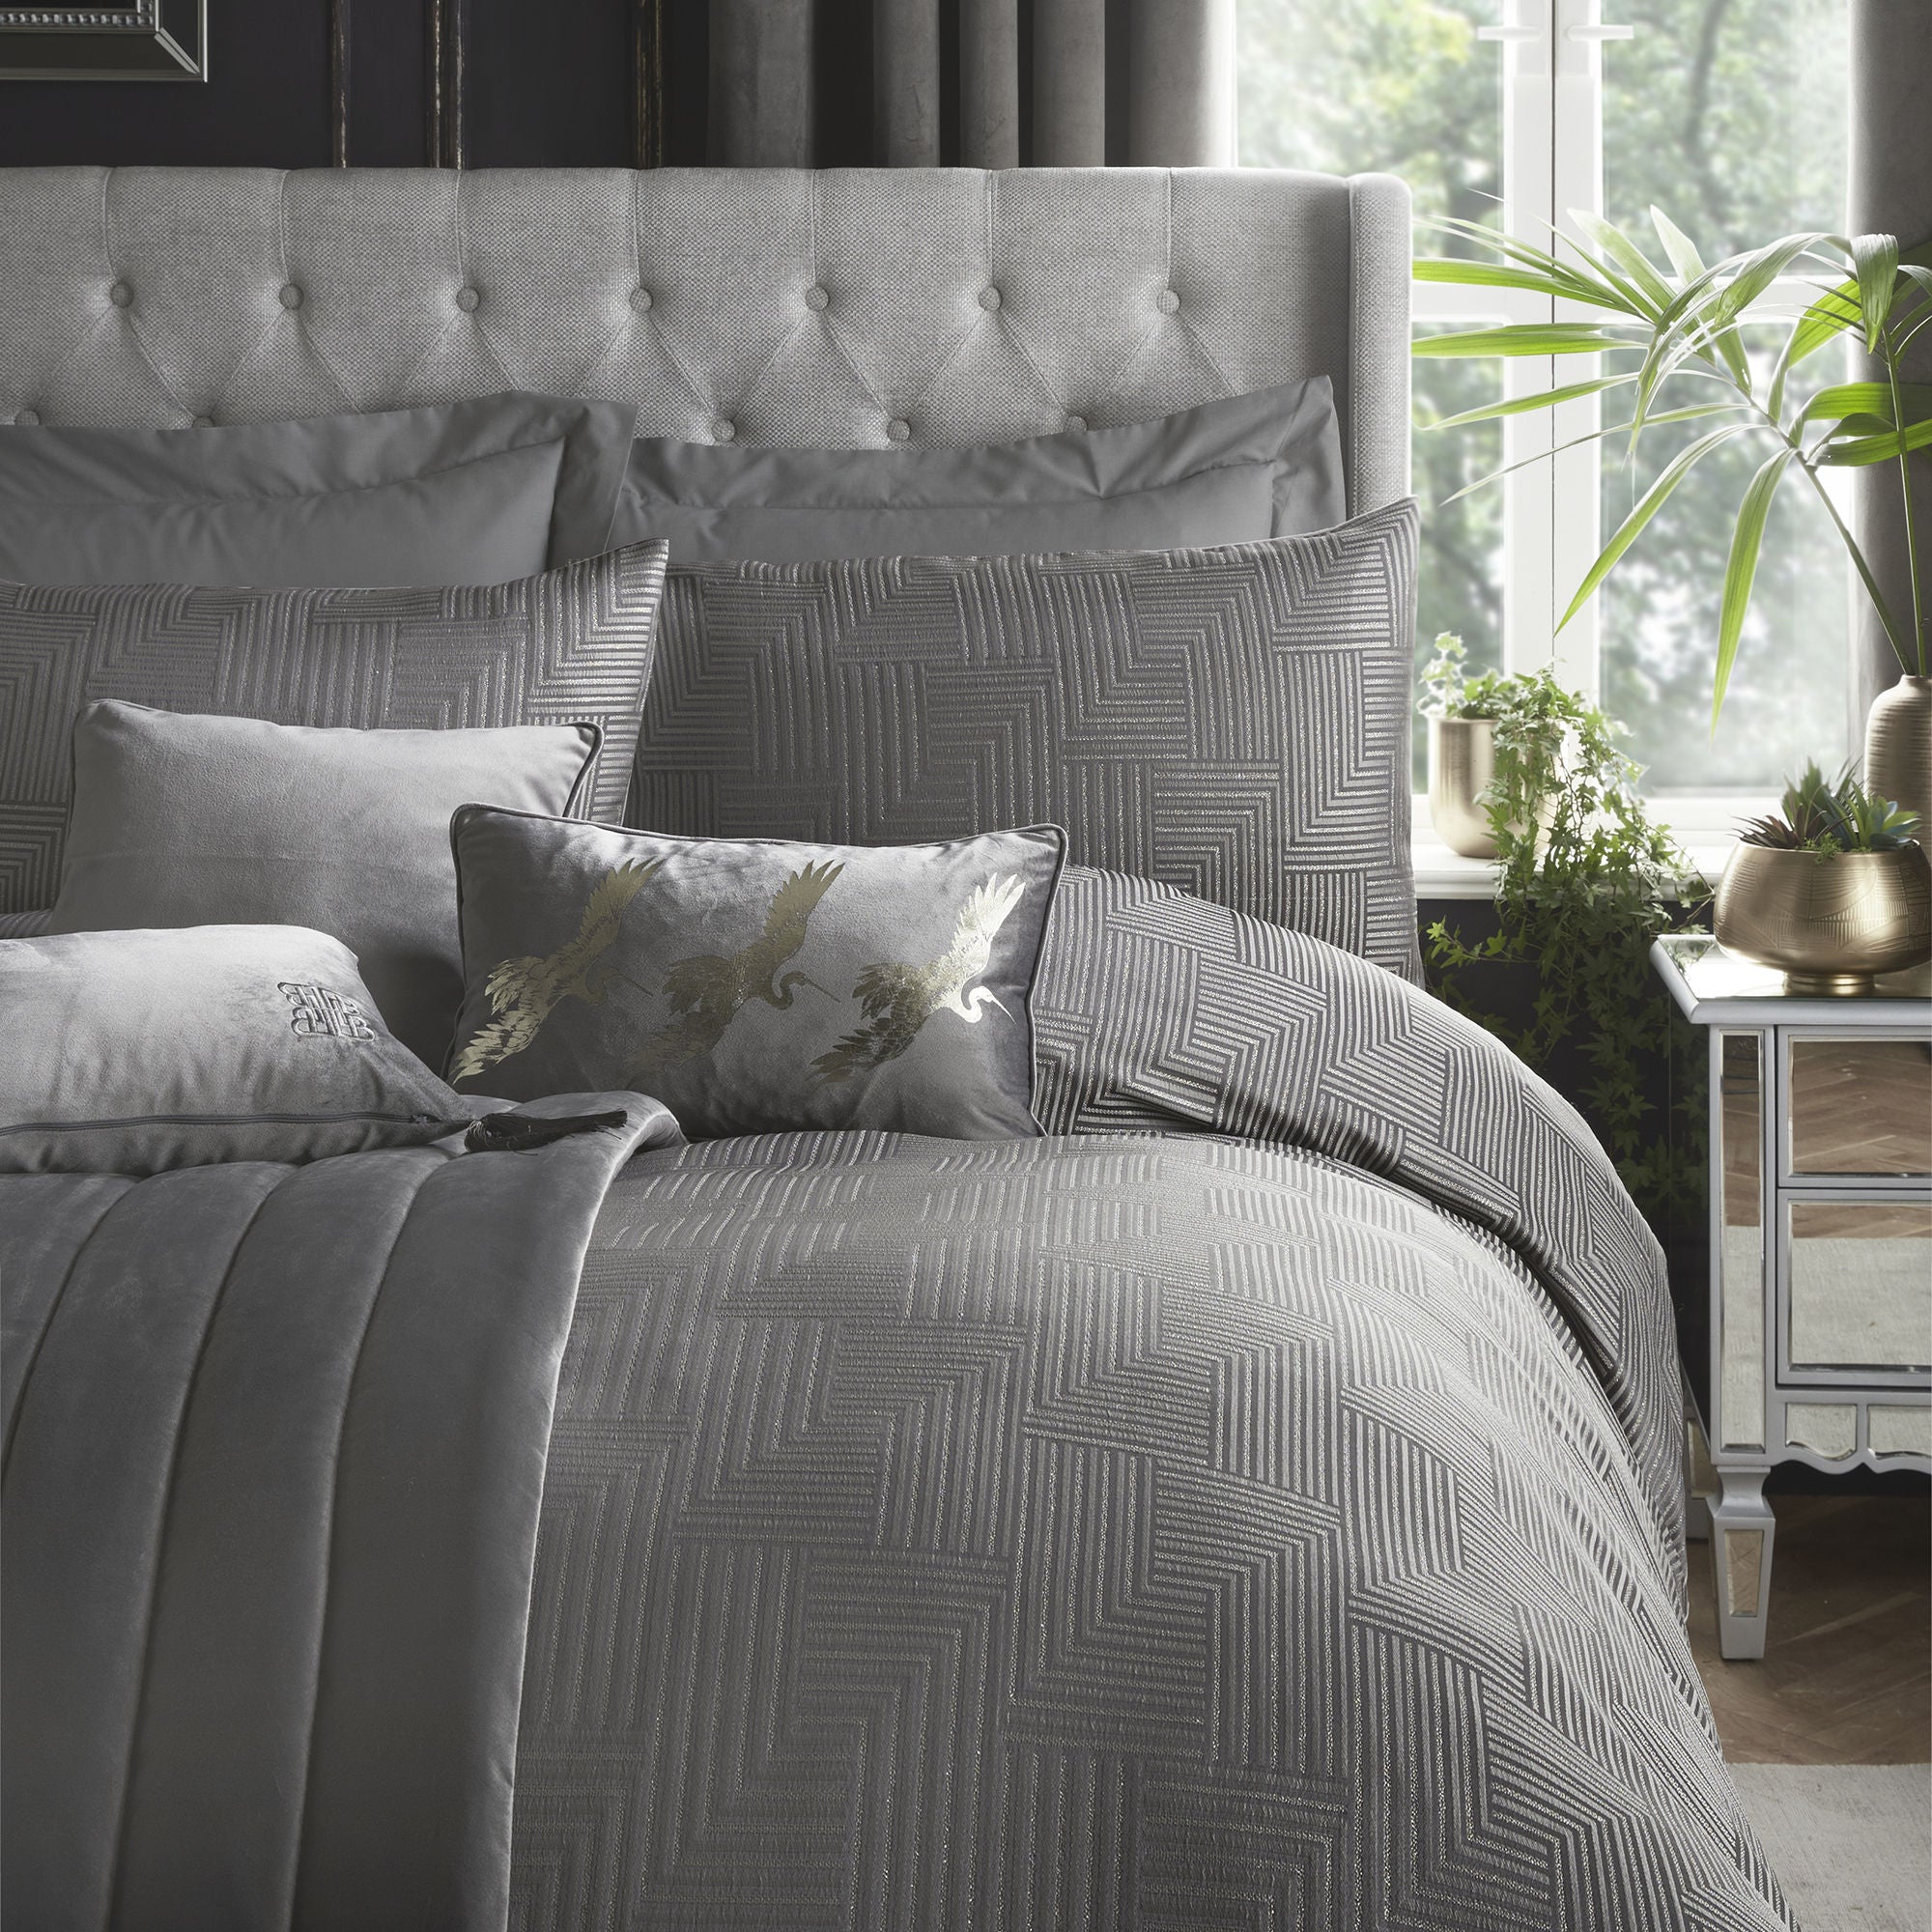 Palladio Duvet Cover Set by Laurence Llewelyn-Bowen in Slate - Duvet Cover Set - Laurence Llewelyn-Bowen